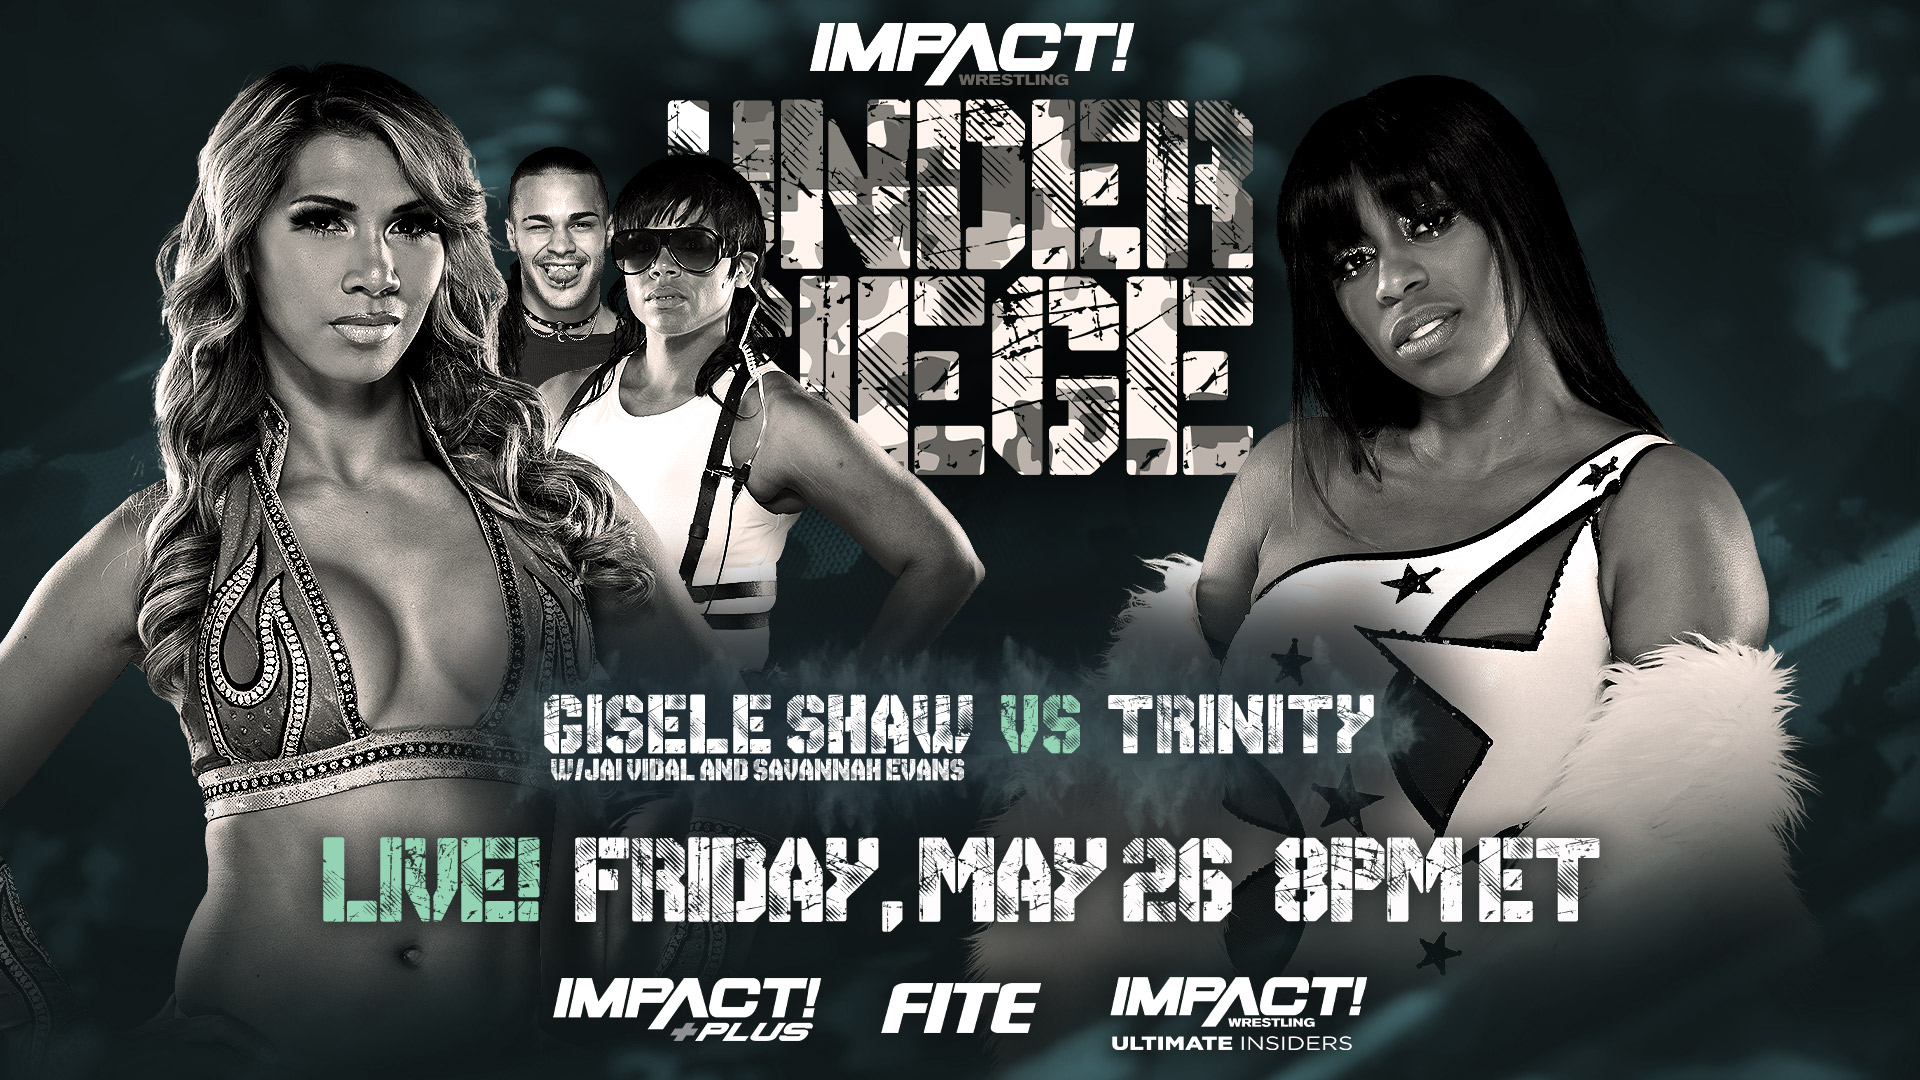 Gisele Shaw Answers Trinity’s Open Contract for a Match at Under Siege – IMPACT Wrestling